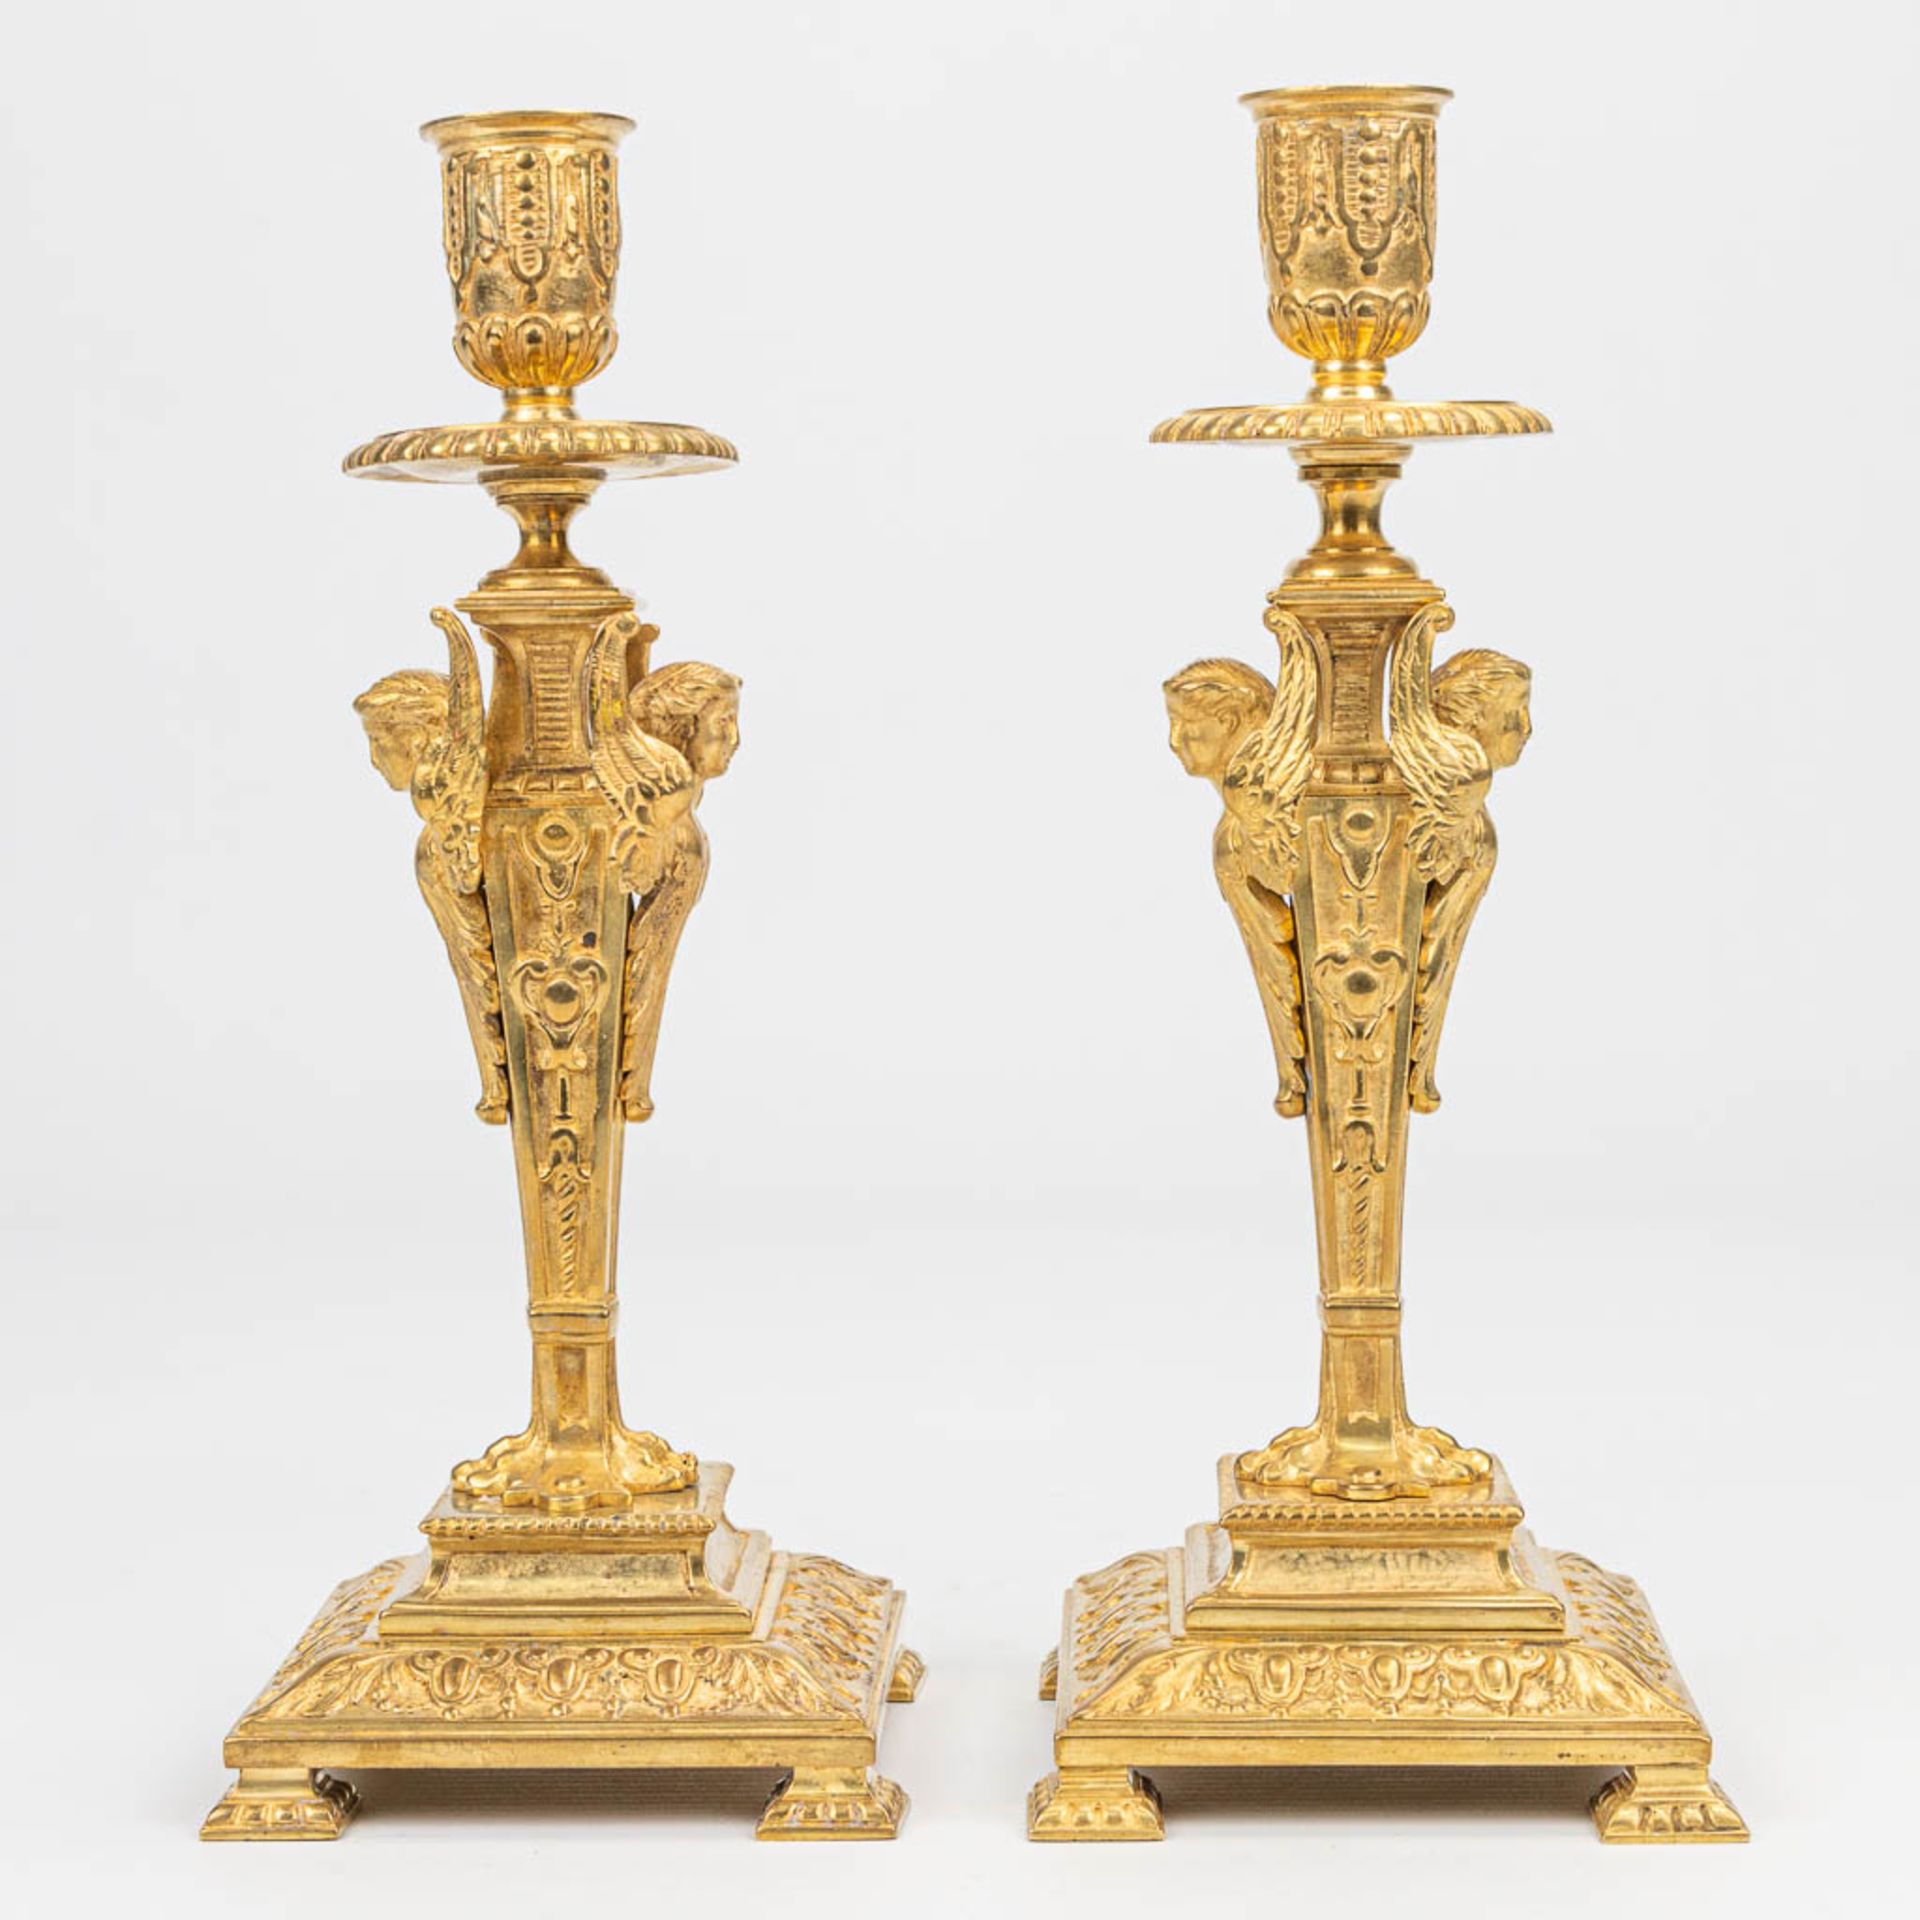 a pair of gilt Napoleon 3 bronze candlesticks, decorated with angels. (11 x 11 x 26,5 cm)